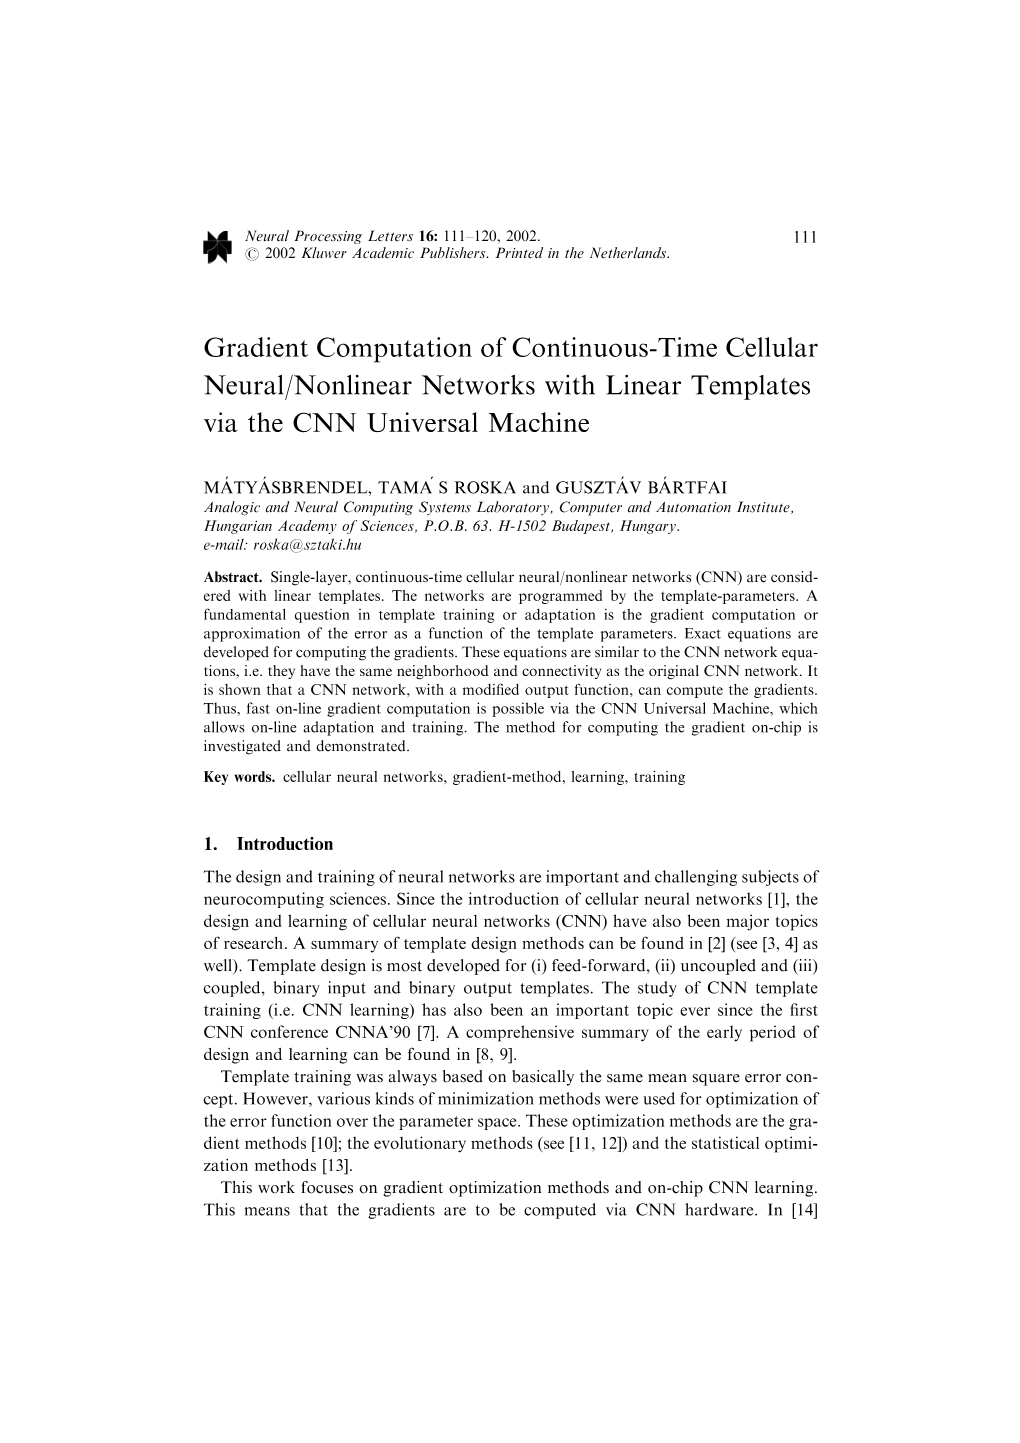 Gradient Computation of Continuous-Time Cellular Neural/Nonlinear Networks with Linear Templates Via the CNN Universal Machine